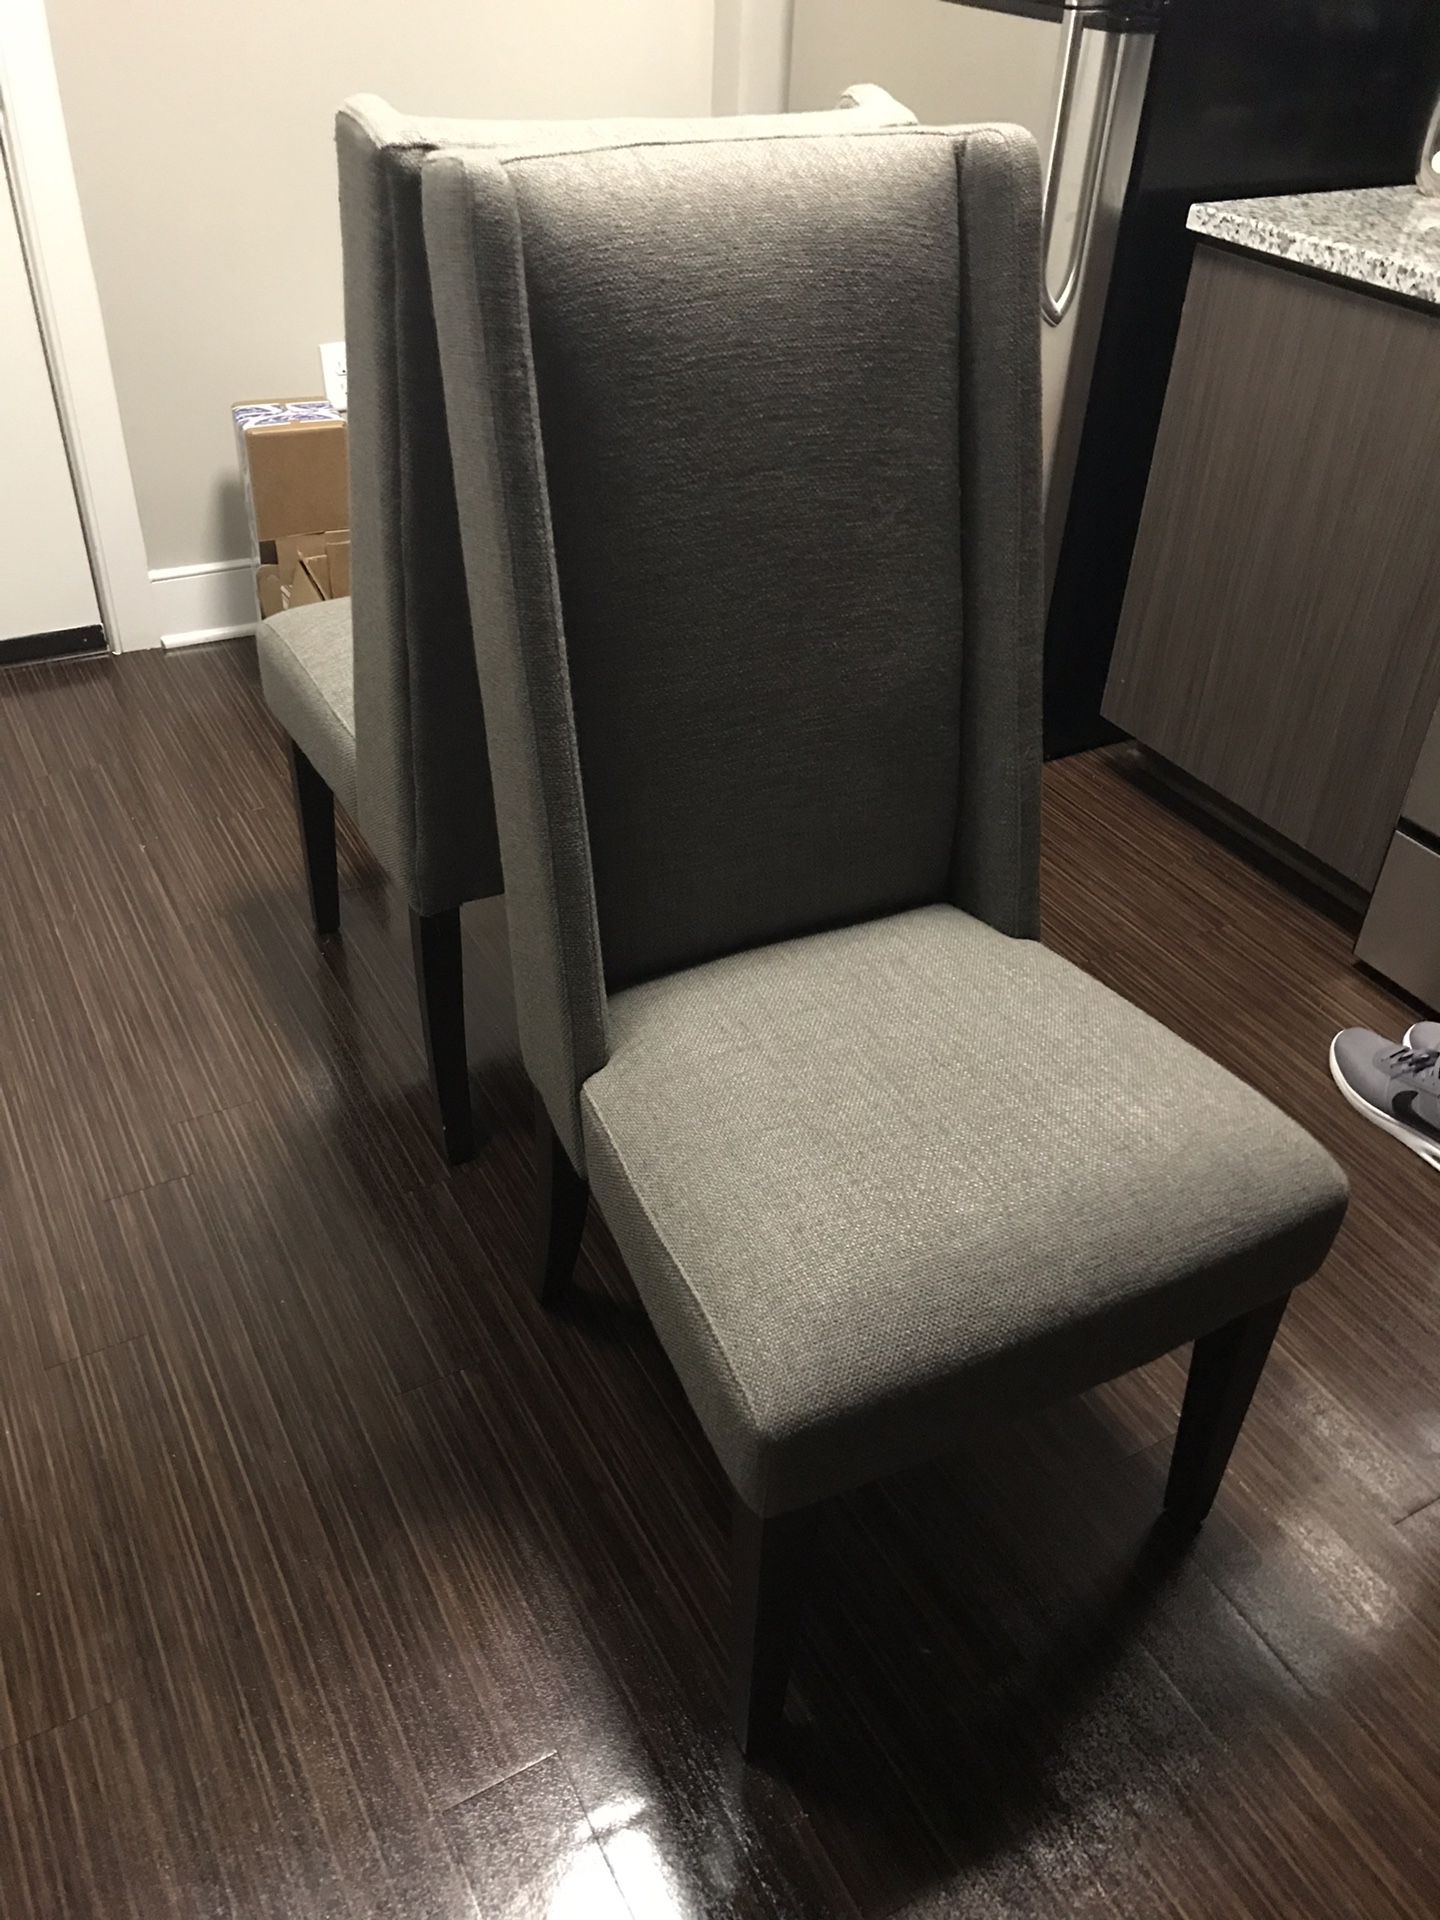 2 West Elm Chairs